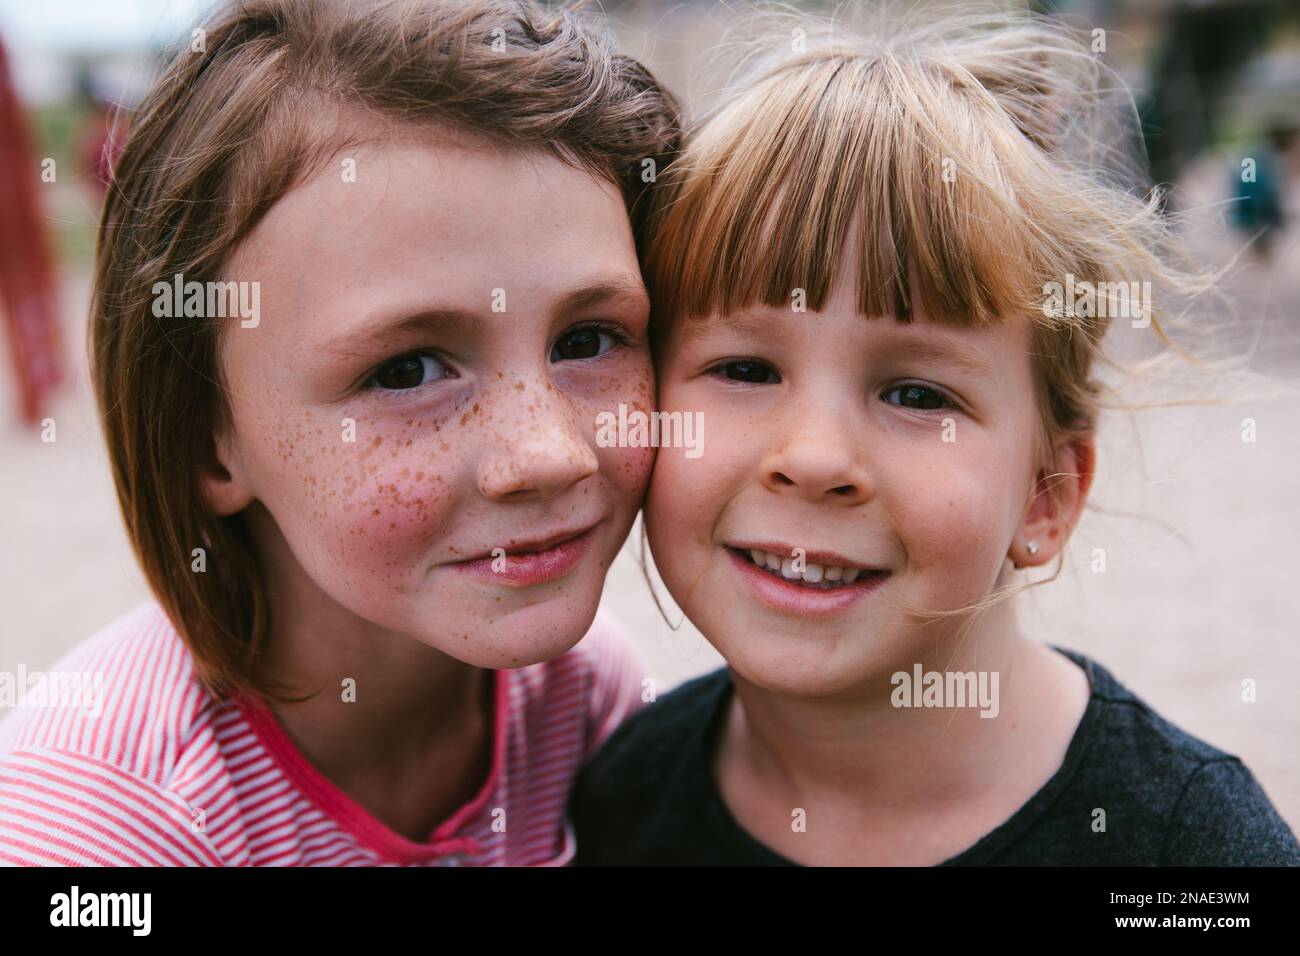 Kids with freckles together outside faces close and happy Stock Photo